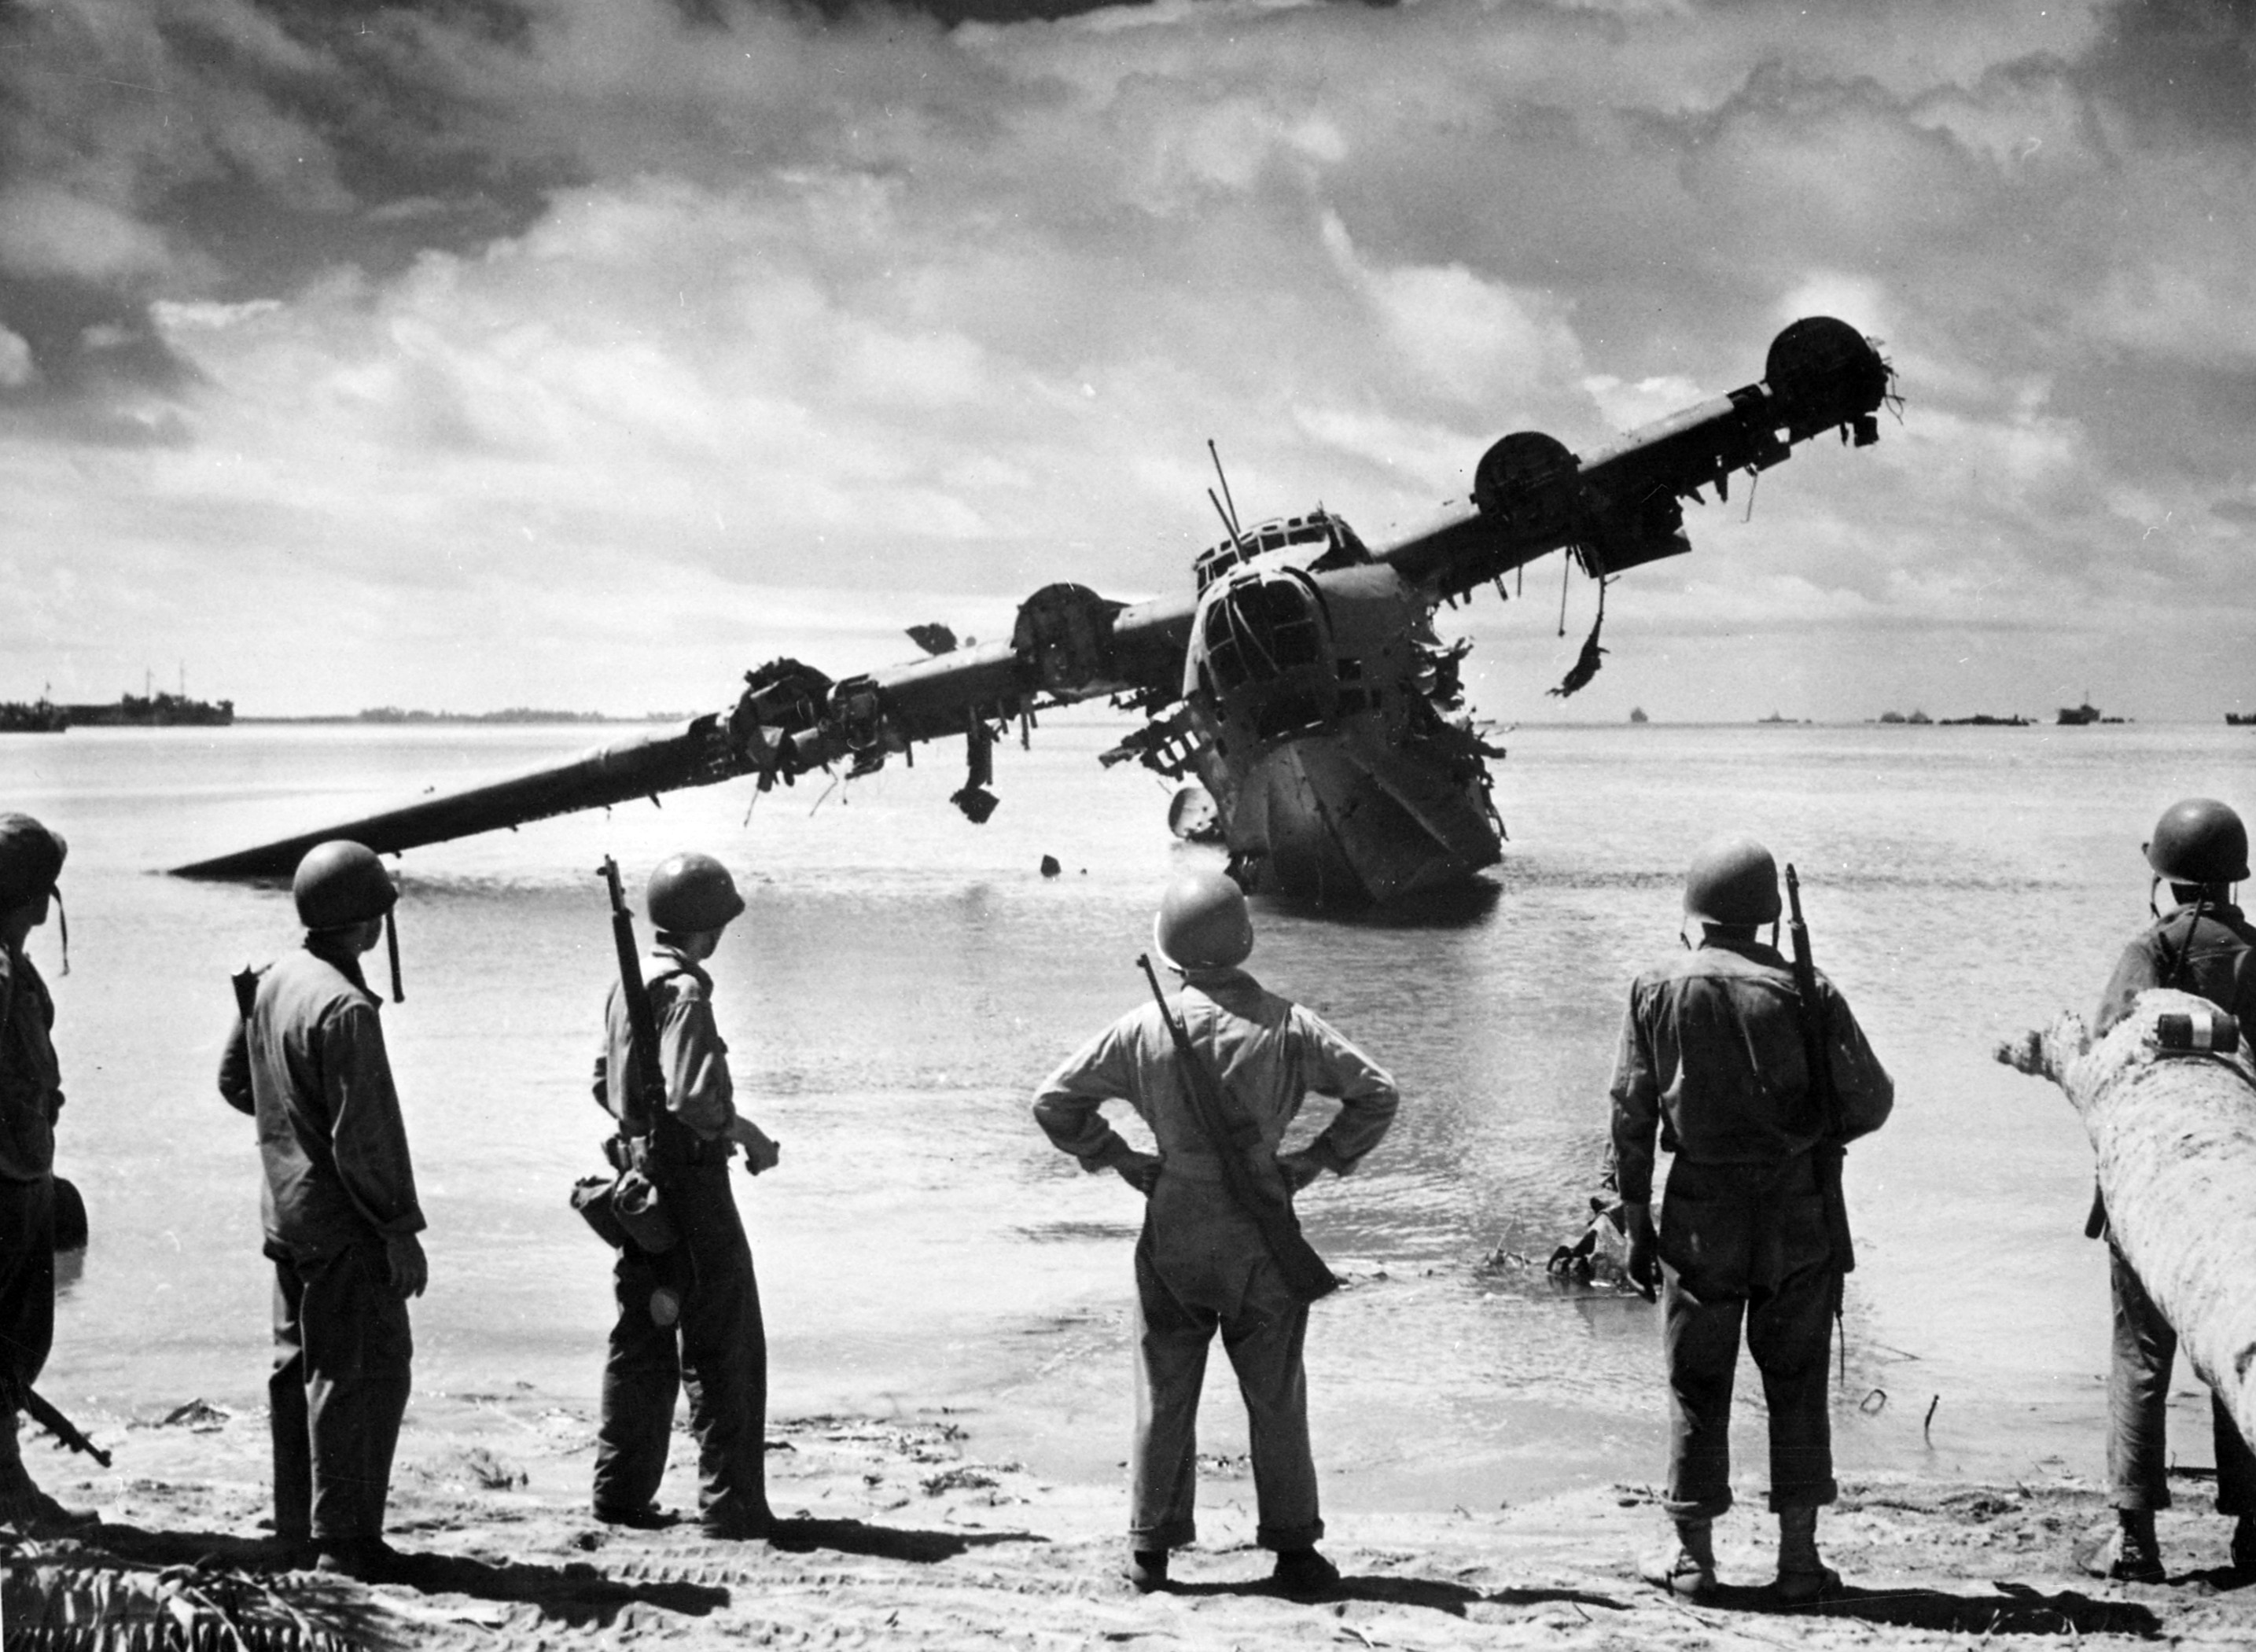 US Army troops looking at a wrecked H8K flying boat, Makin, Gilbert Islands, Nov 1943